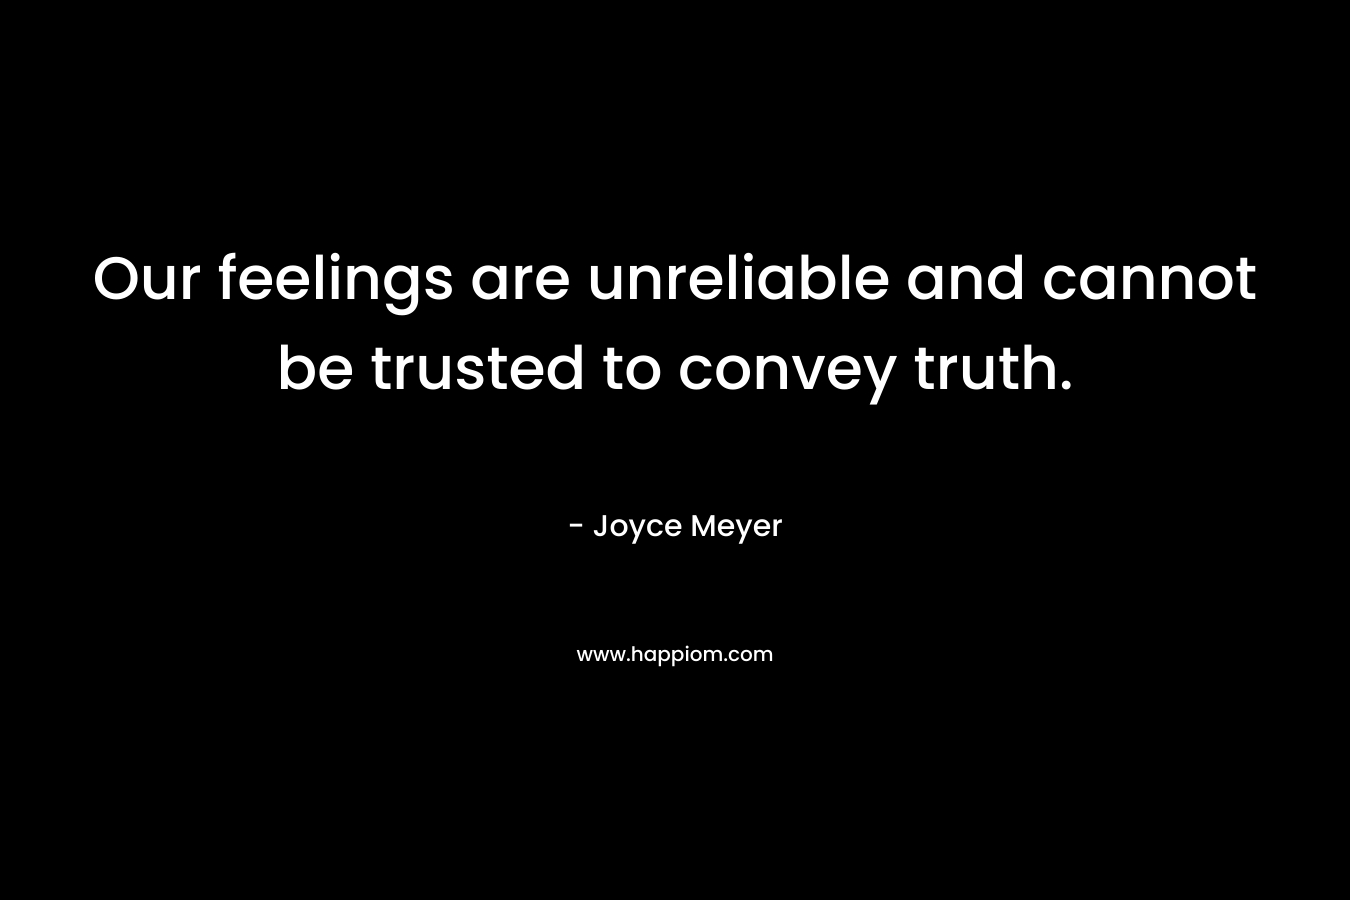 Our feelings are unreliable and cannot be trusted to convey truth. – Joyce Meyer